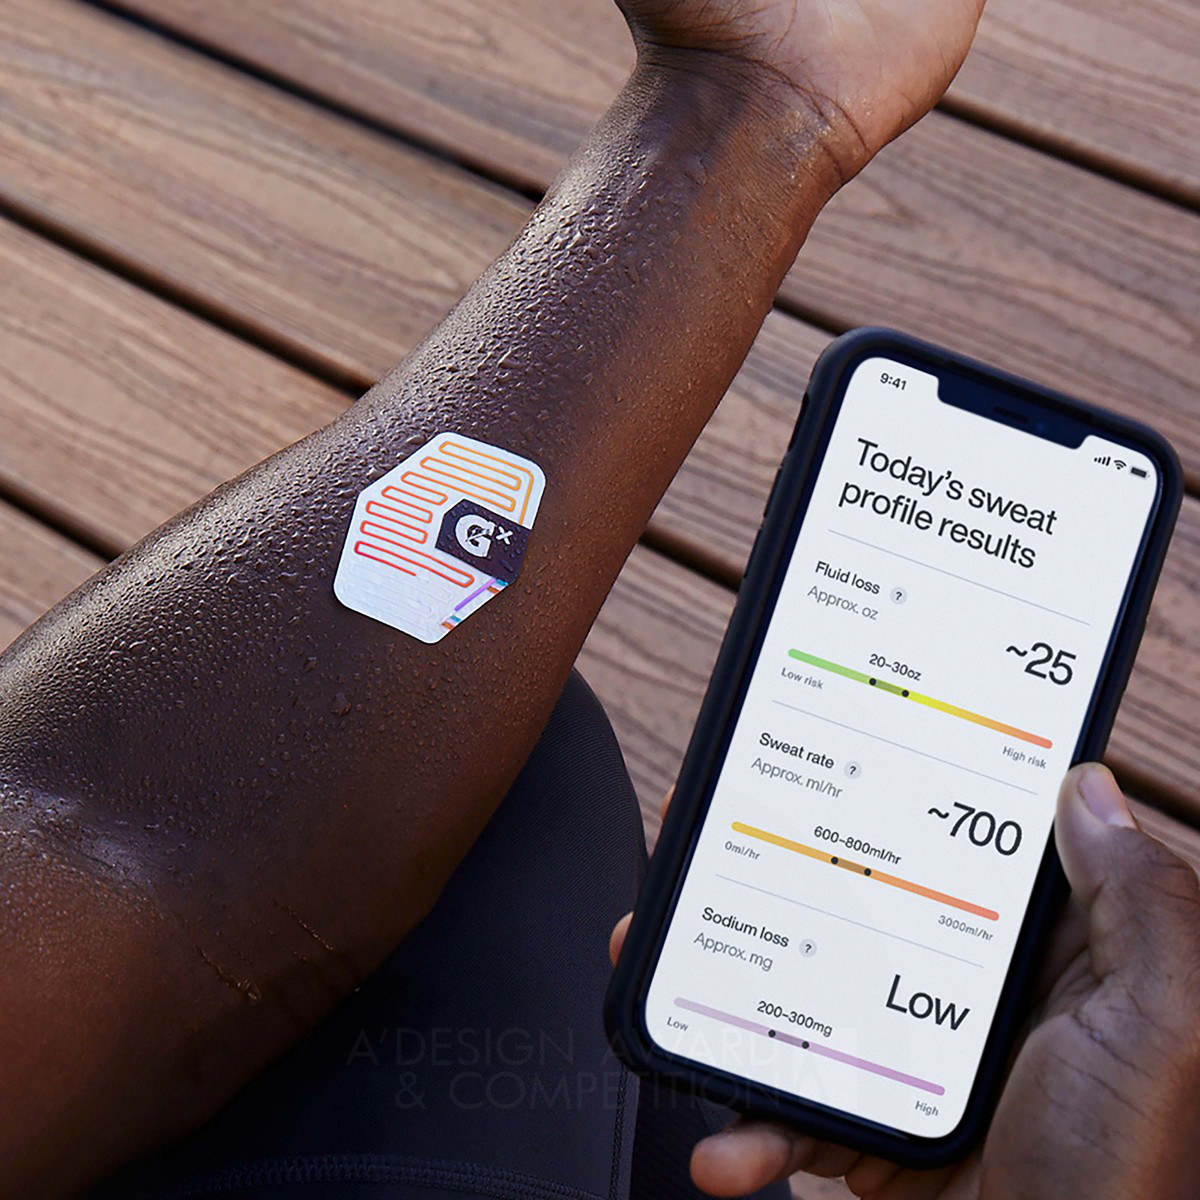 PepsiCo Design and Innovation wins Silver at the prestigious A' Mobile Technologies, Applications and Software Design Award with Gatorade GX Patch and APP Mobile Application.